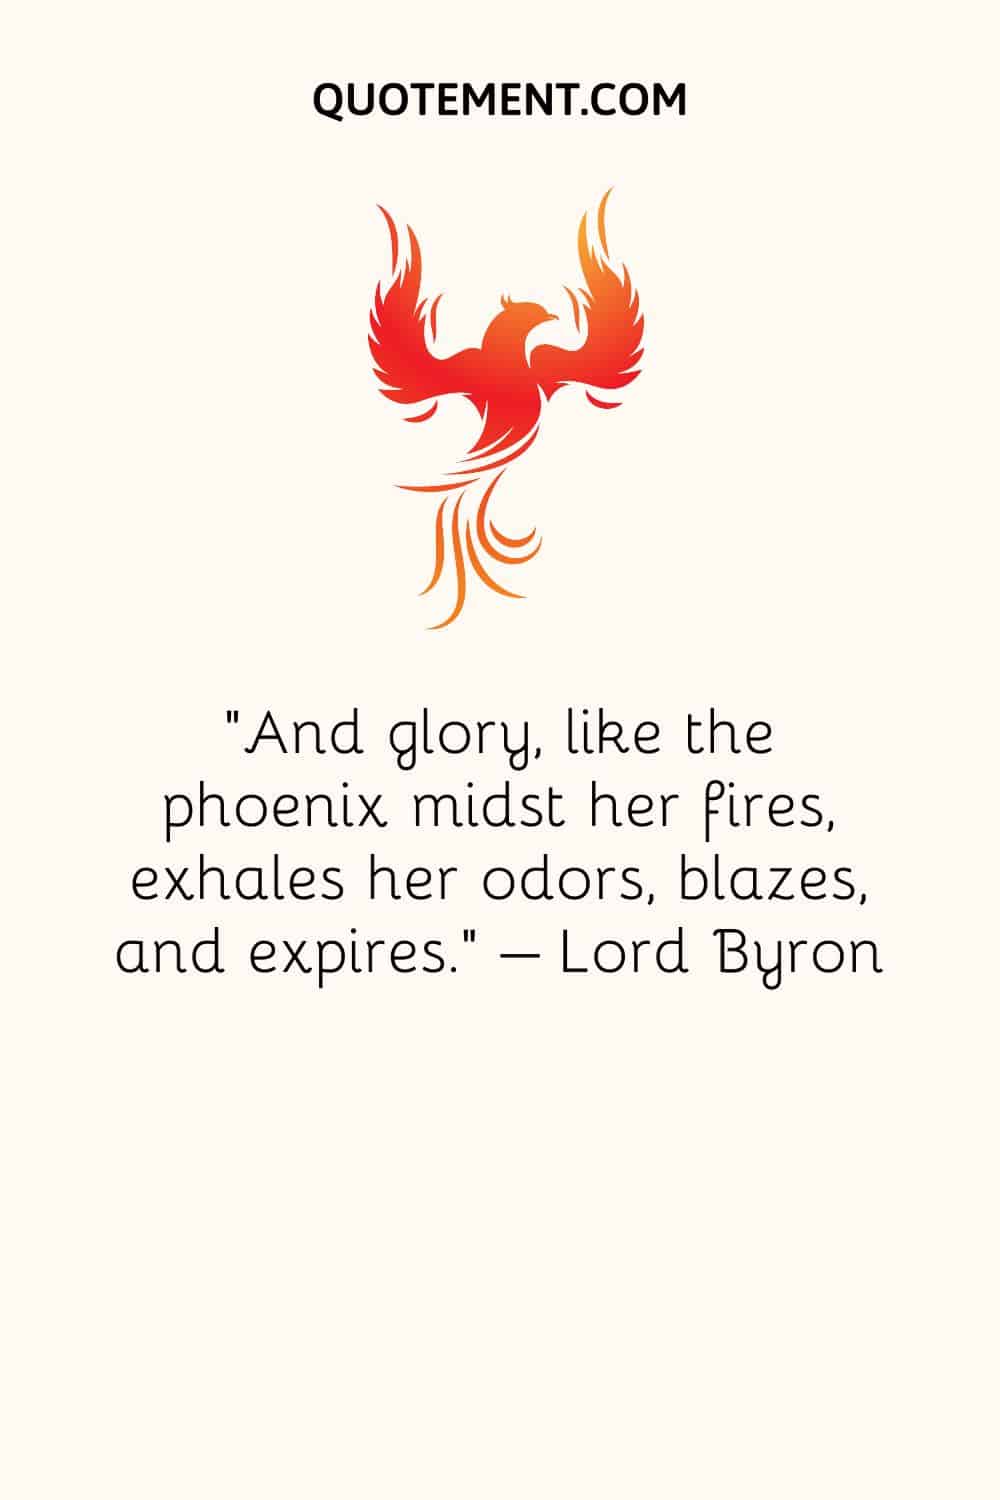 And glory, like the phoenix midst her fires, exhales her odors, blazes, and expires